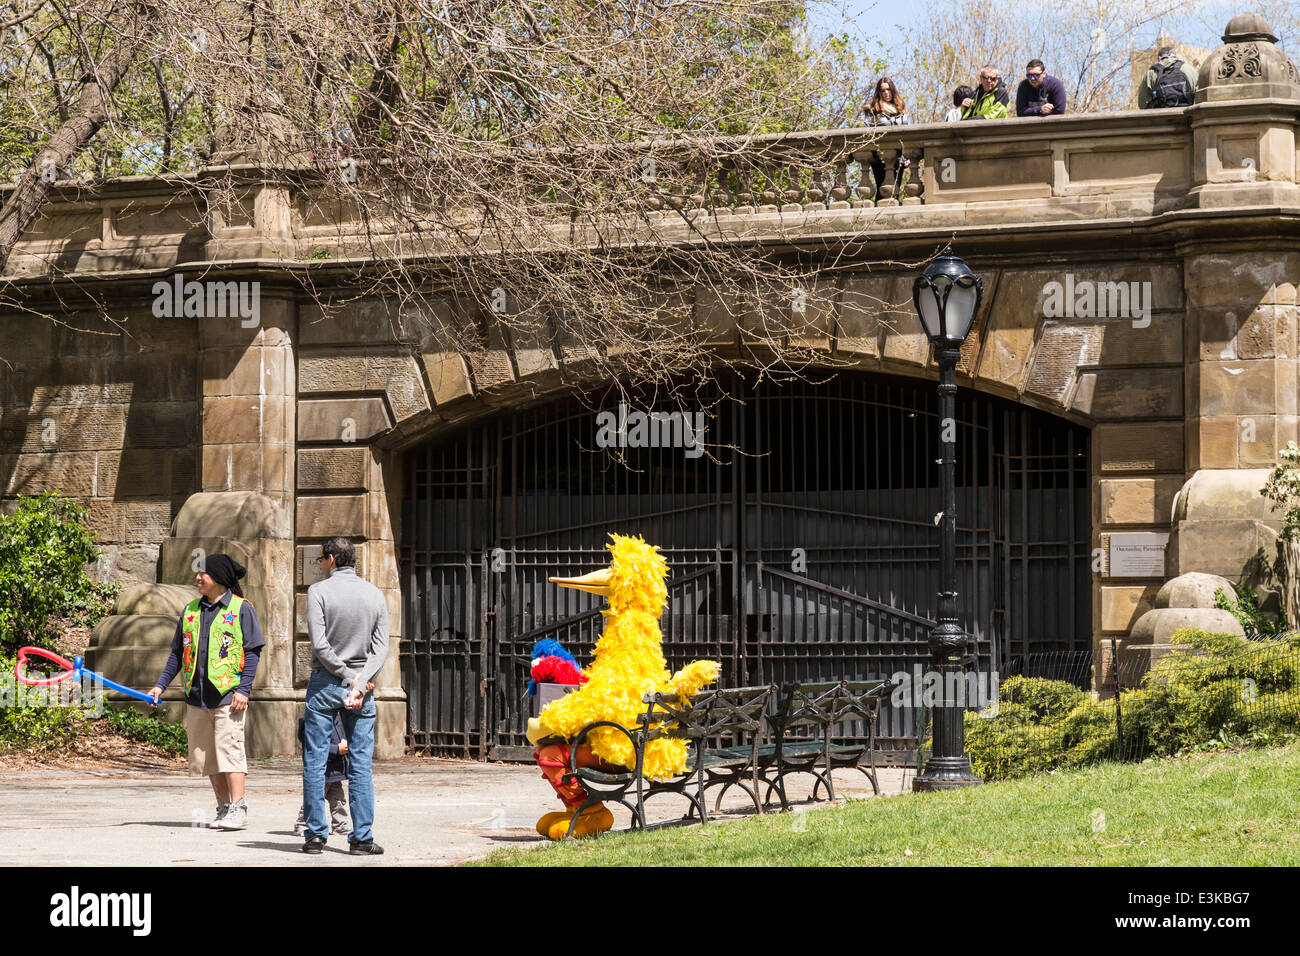 Big Bird Character Entertainer Sitting on a Bench, Central park, NYc, USA Stock Photo